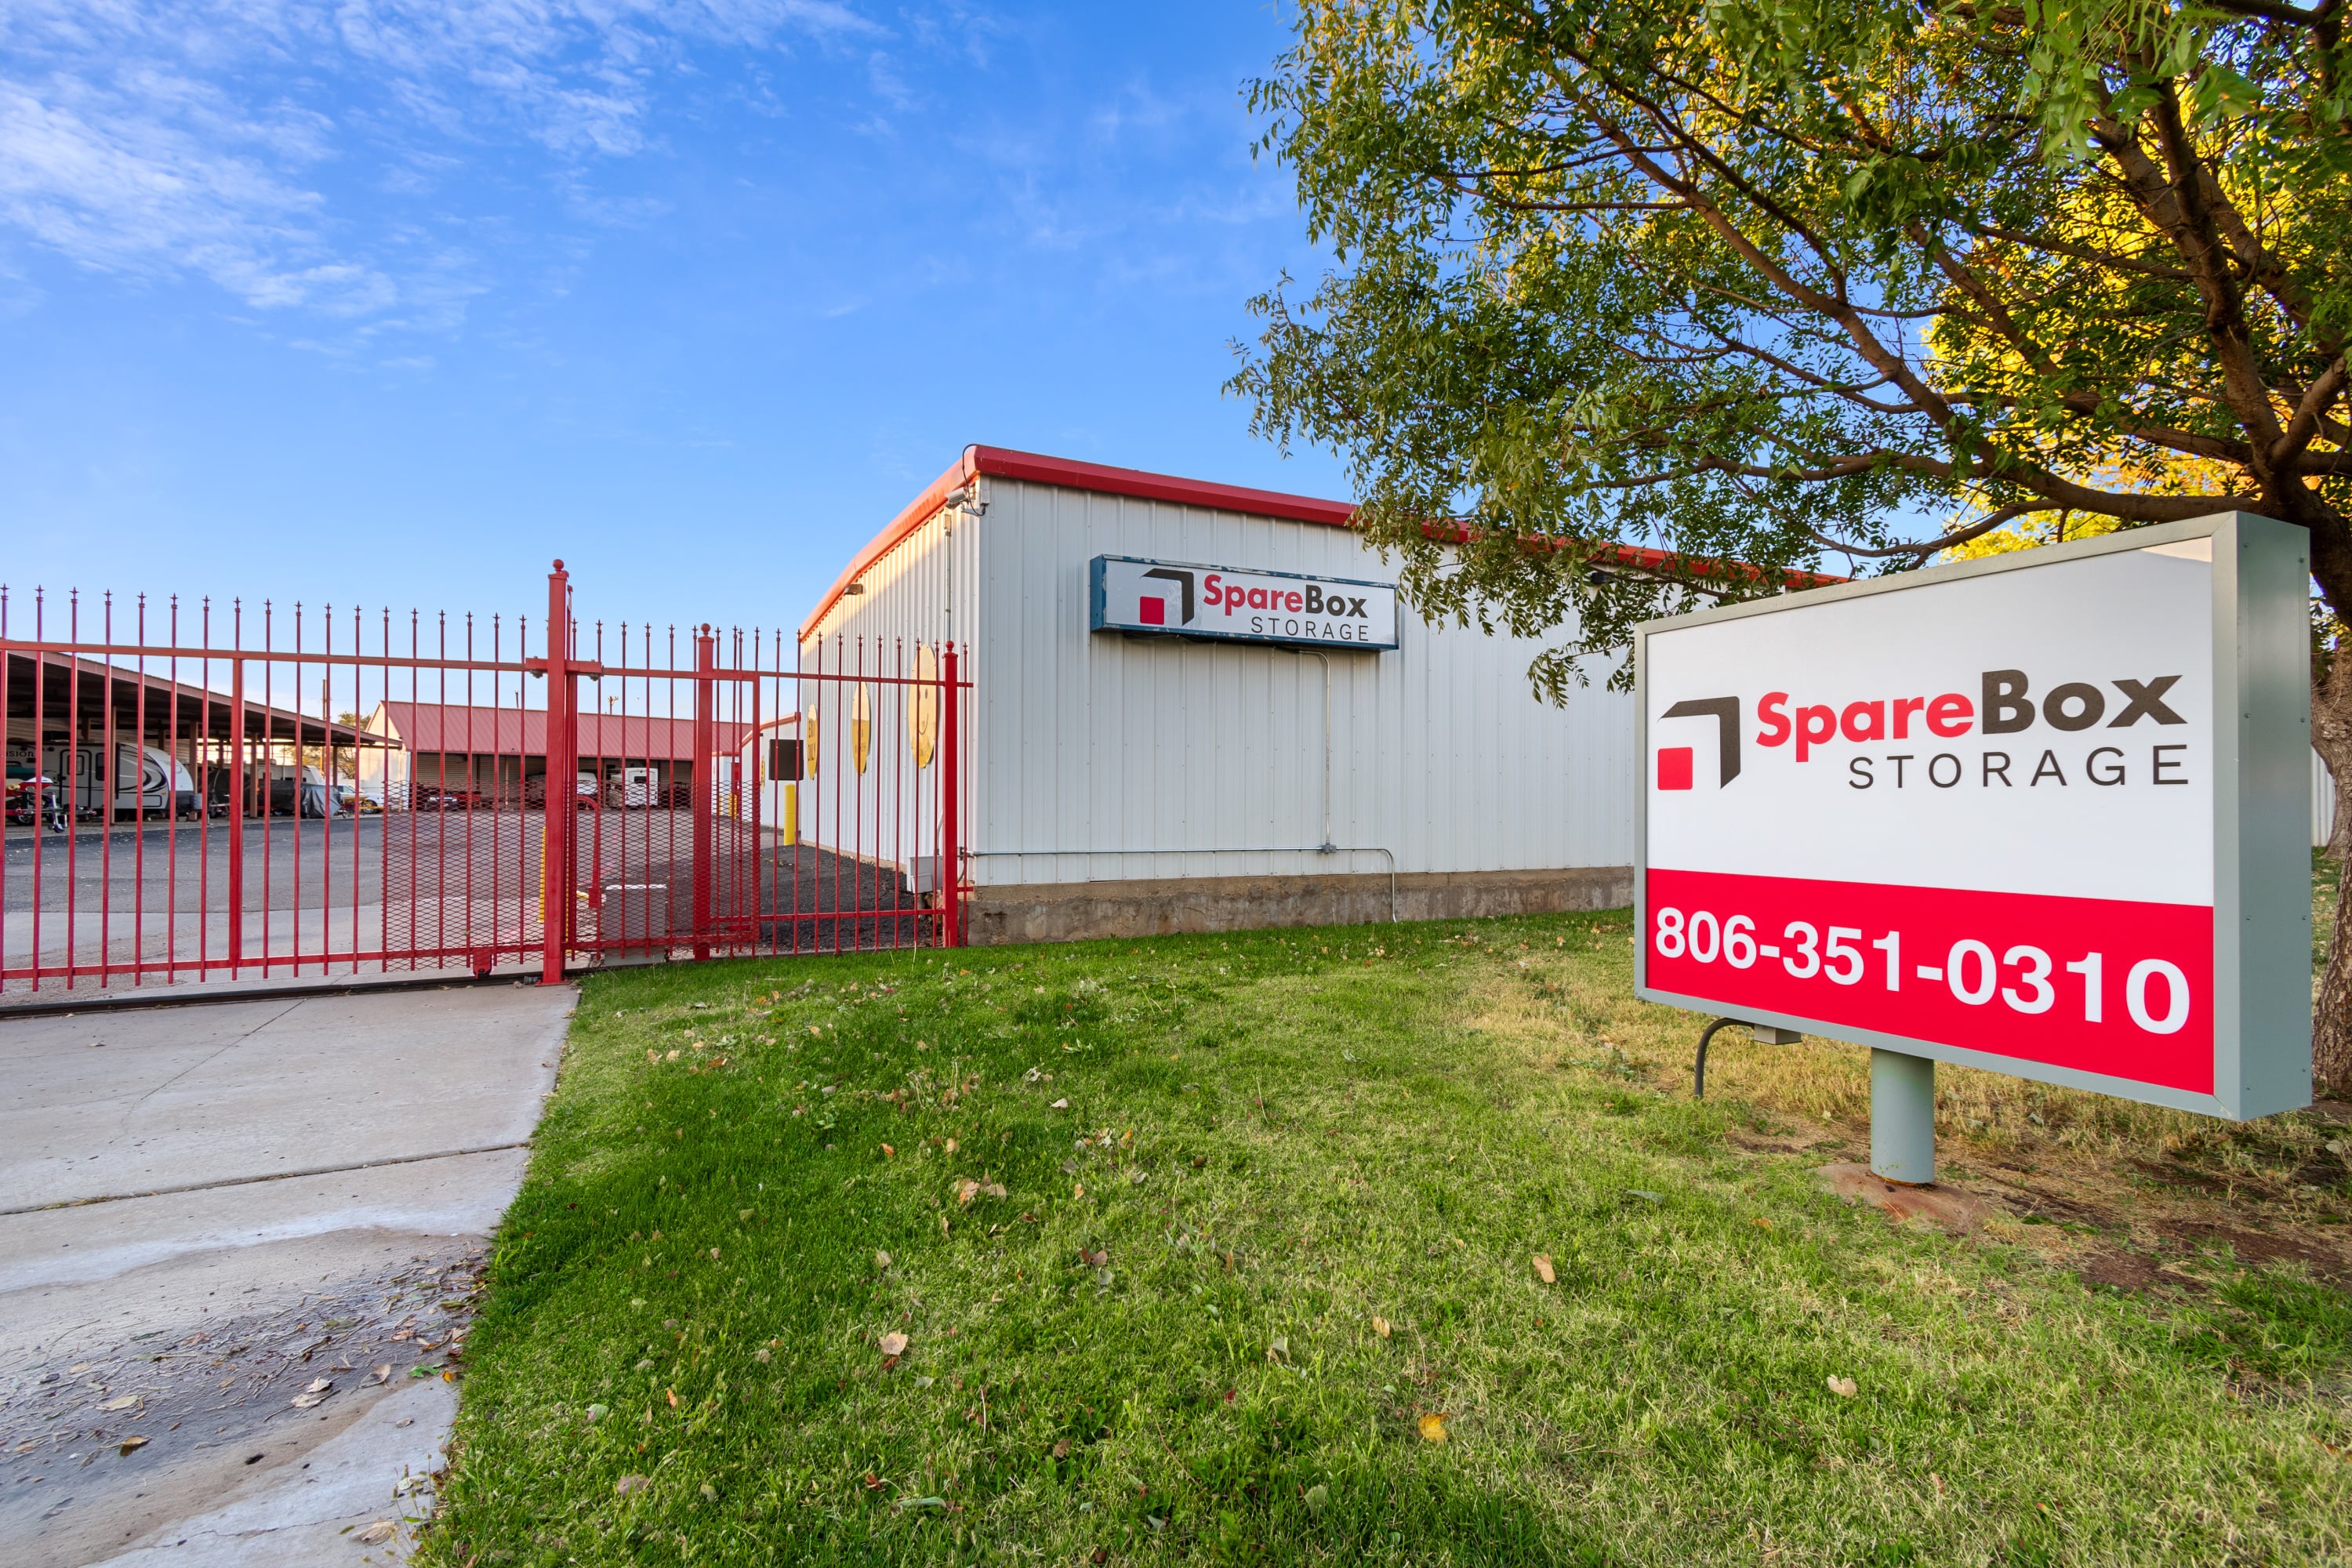 SpareBox offers self-storage in Amarillo, TX with kiosks for safe contactless self-storage | SpareBox Storage